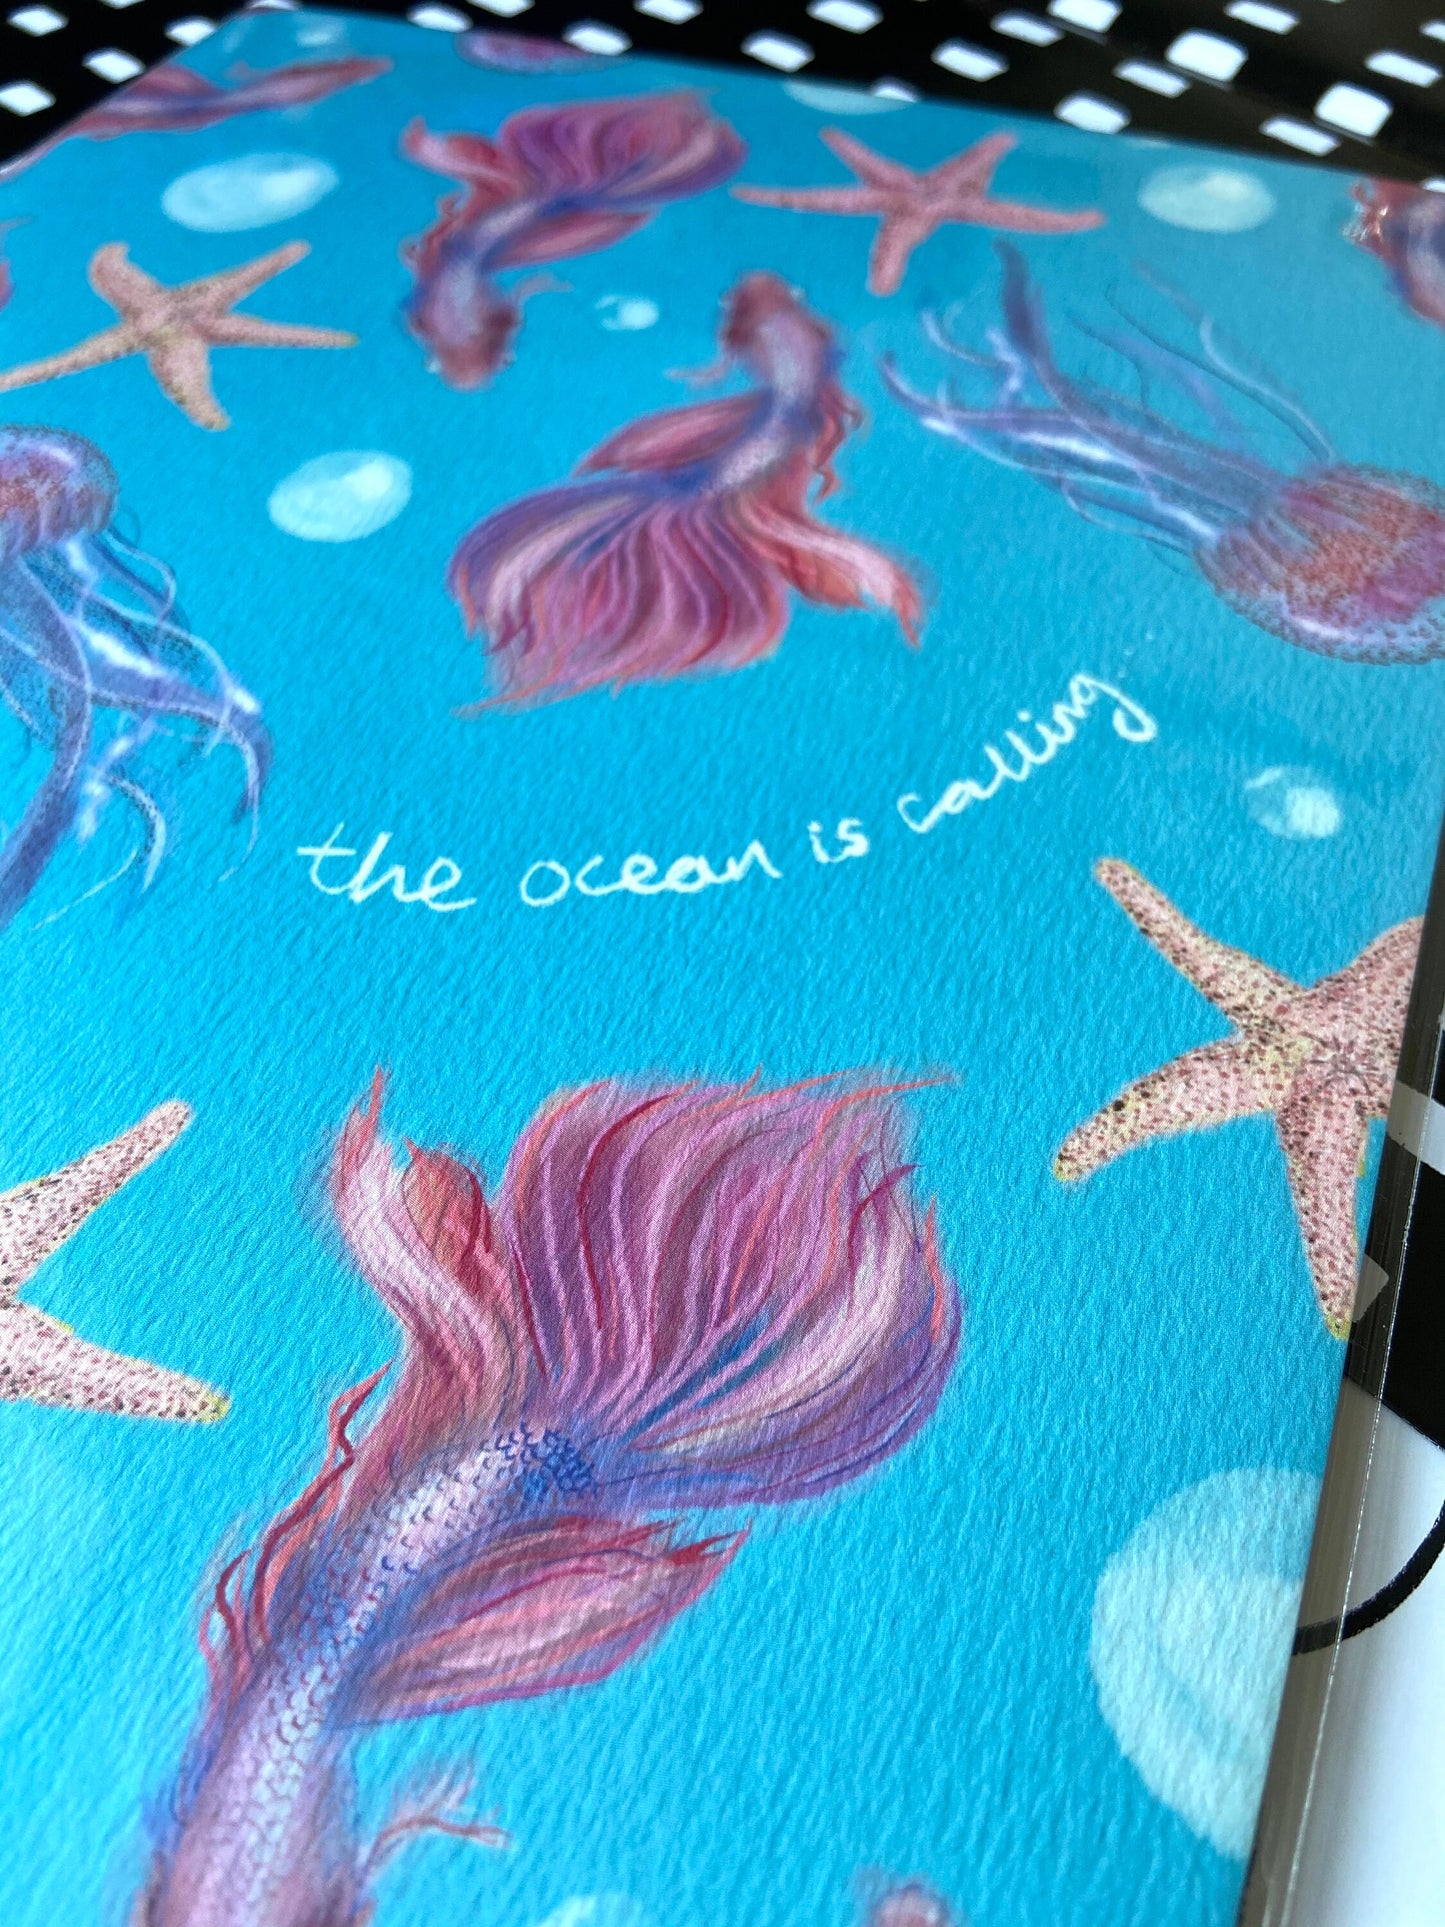 The Ocean is Calling A4 Print